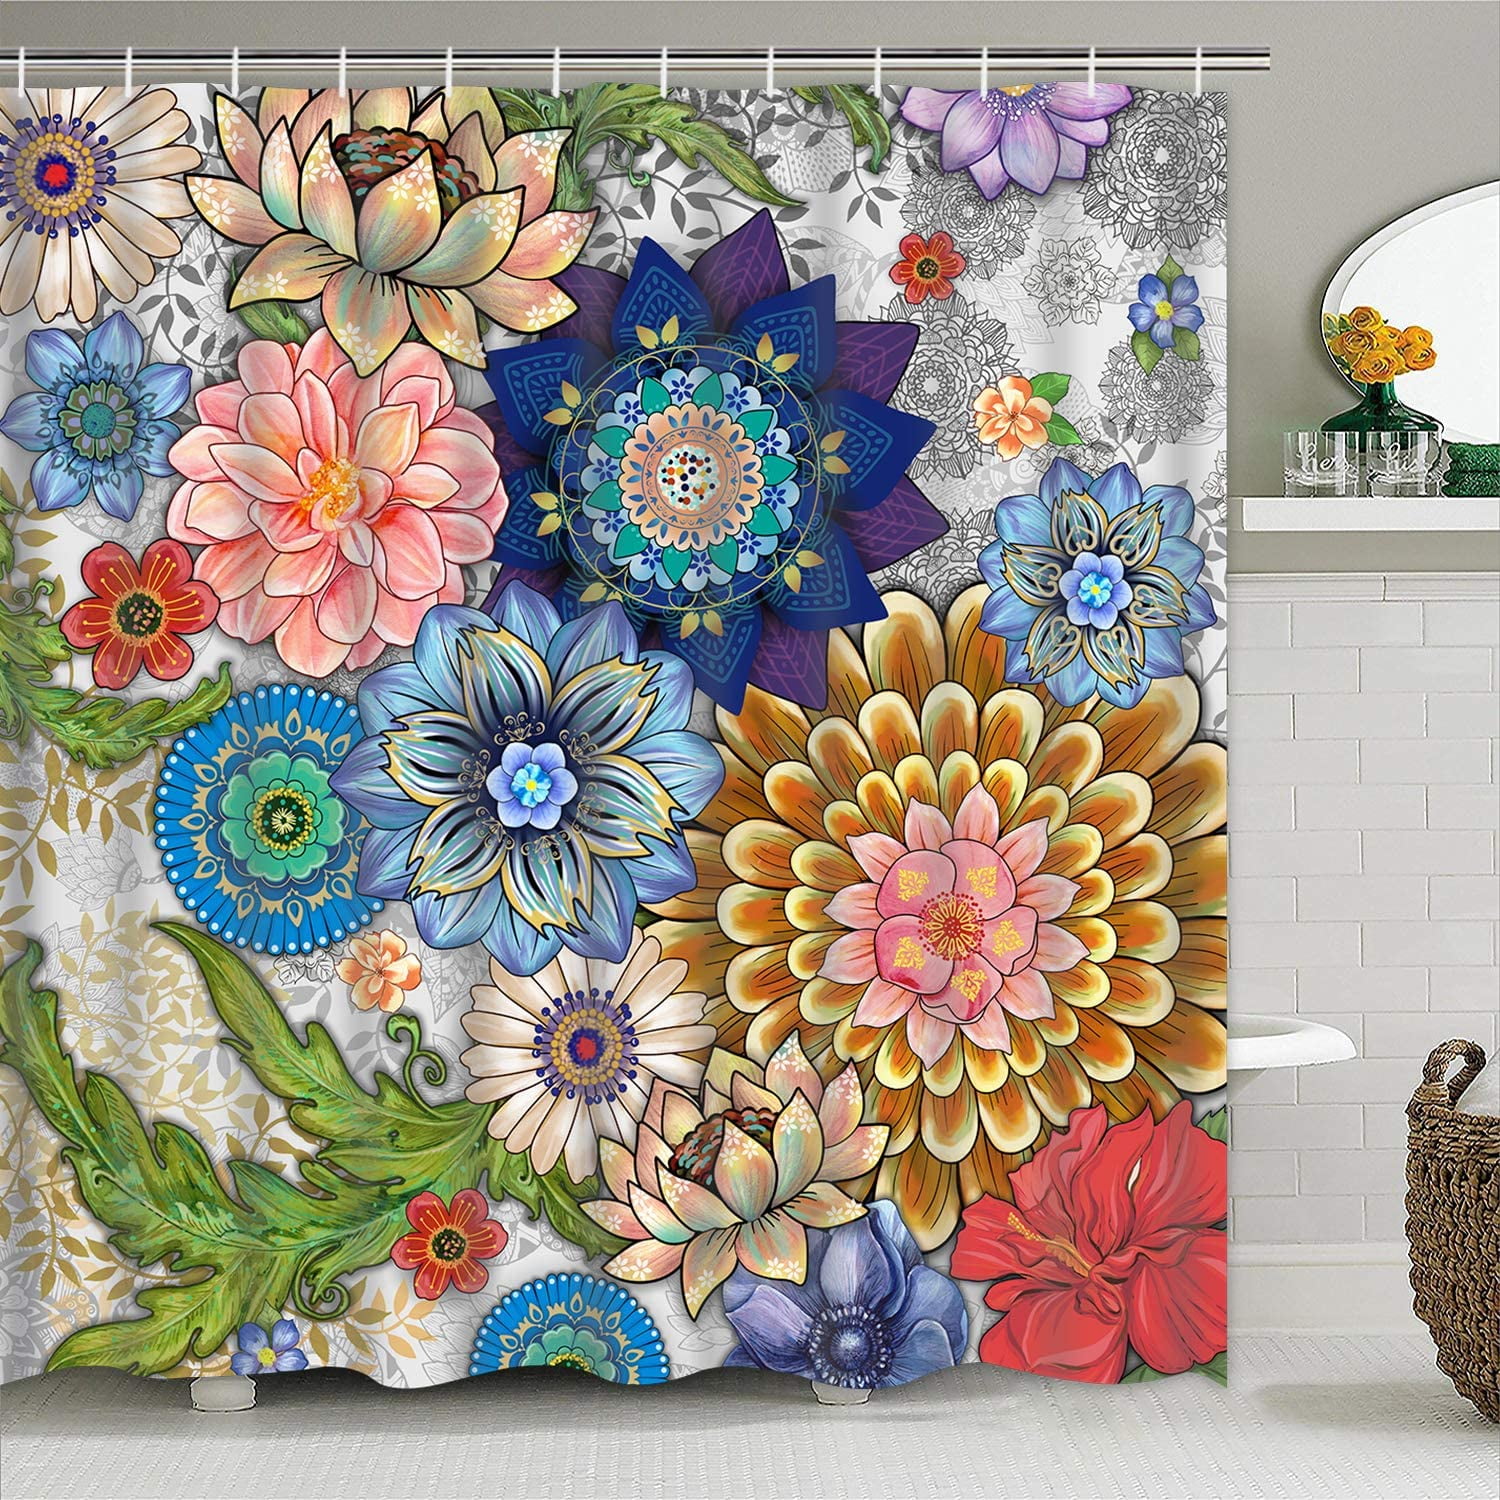 Shower Curtain Liner Polyester Waterproof Fabric Letter Box Flowers Window 72" 